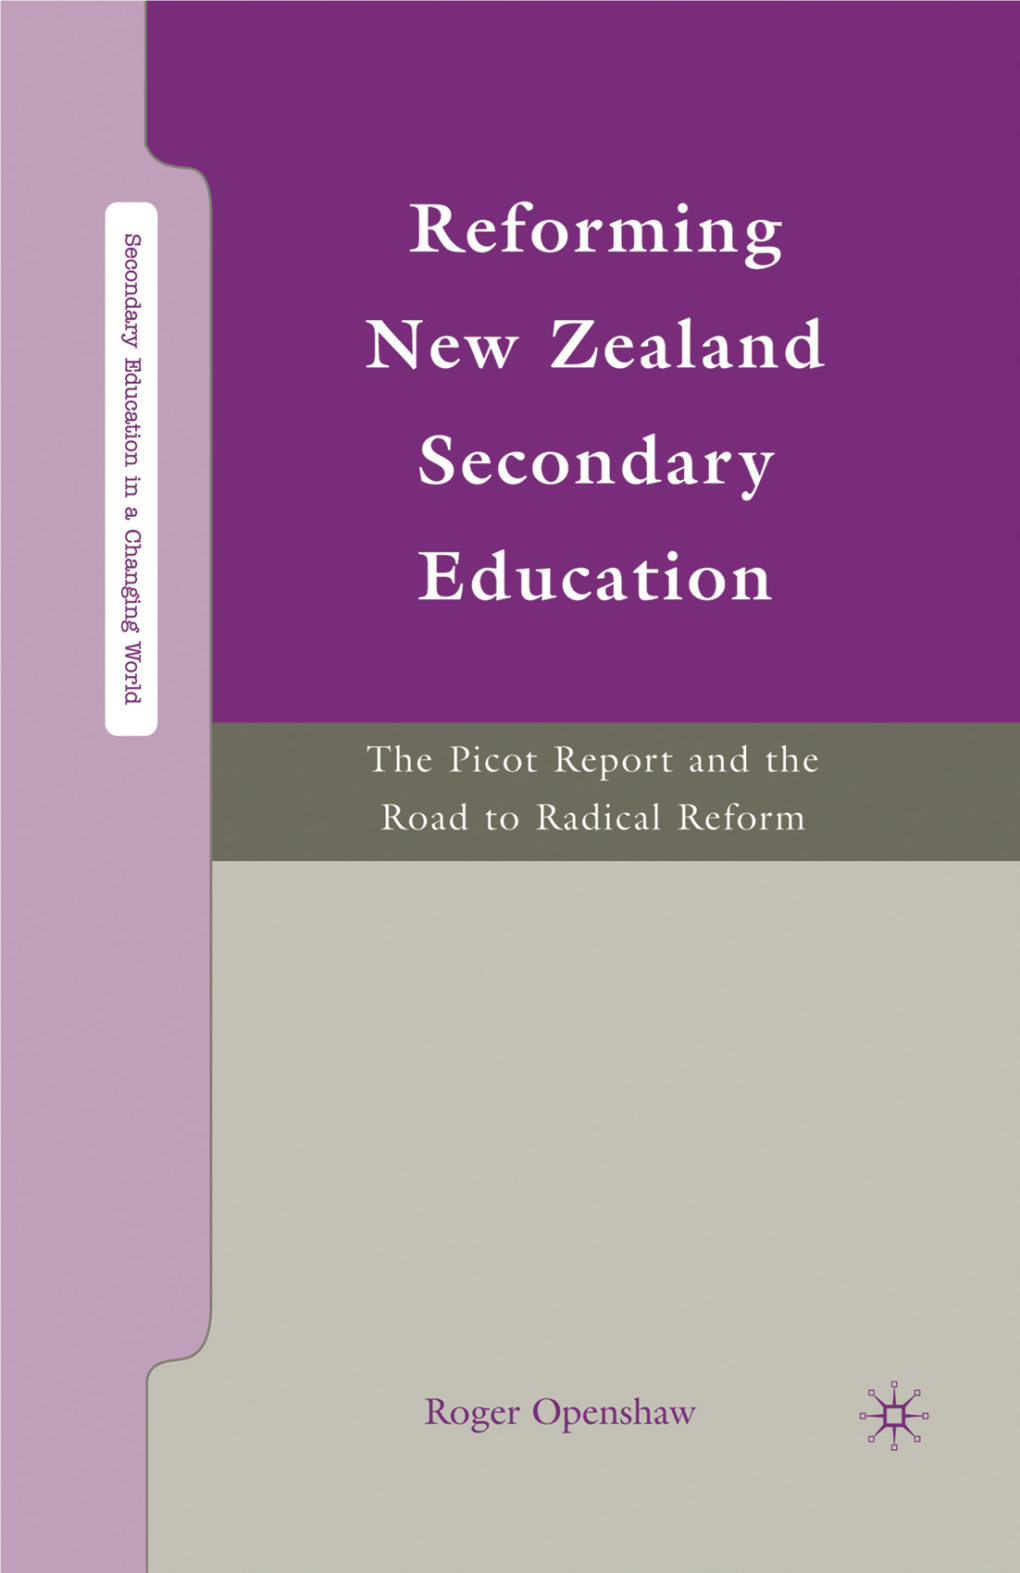 Reforn1ing New Zealand Secondary Education